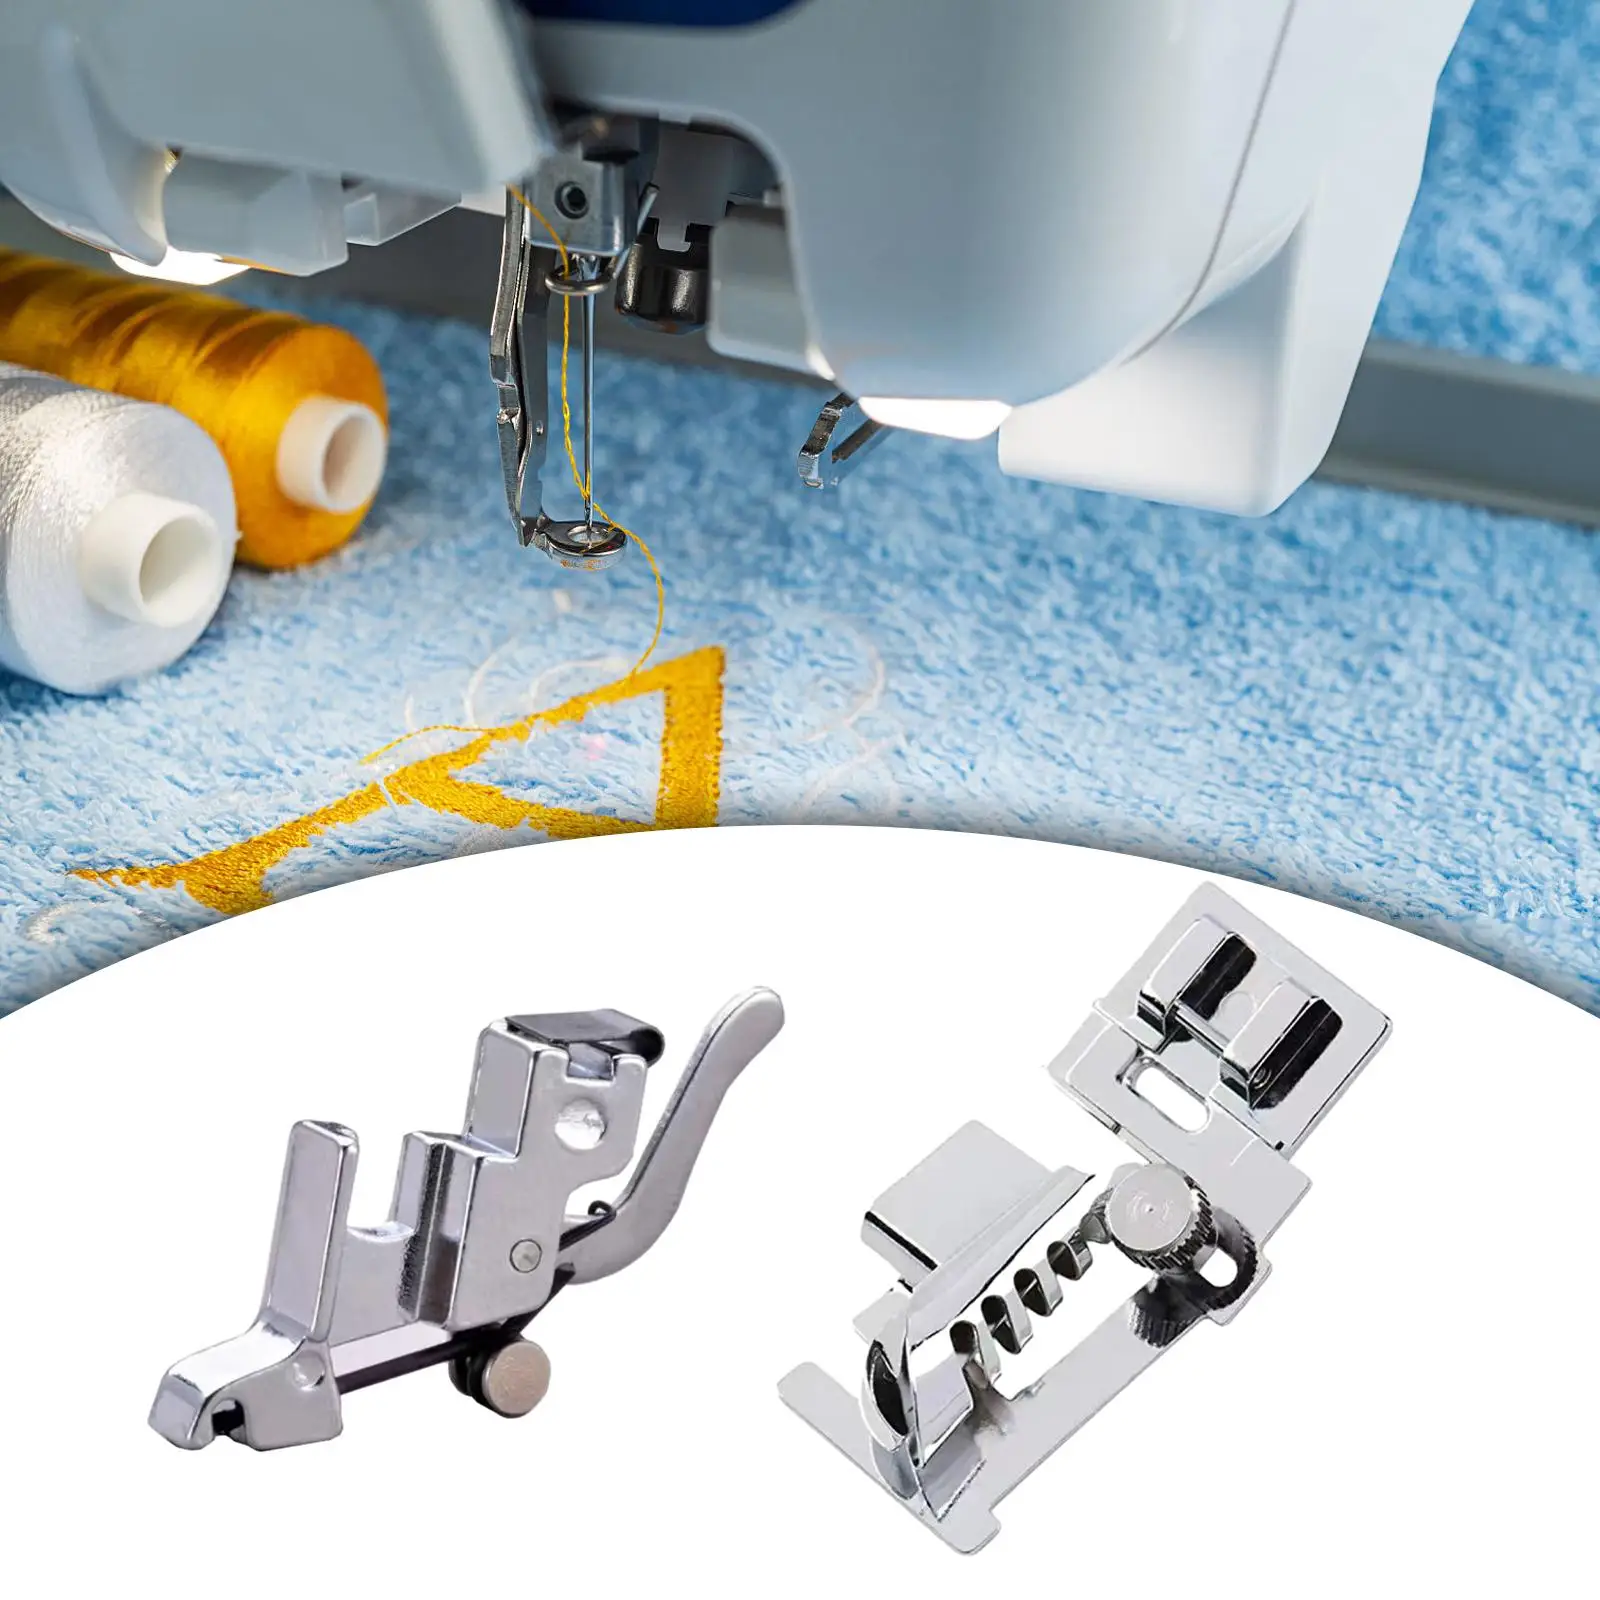 Sewing Machine Parts Home Multipurpose Presser Foot Hemmer Foot for Quilting DIY Crafts Sewing Straight Lines Overstitch